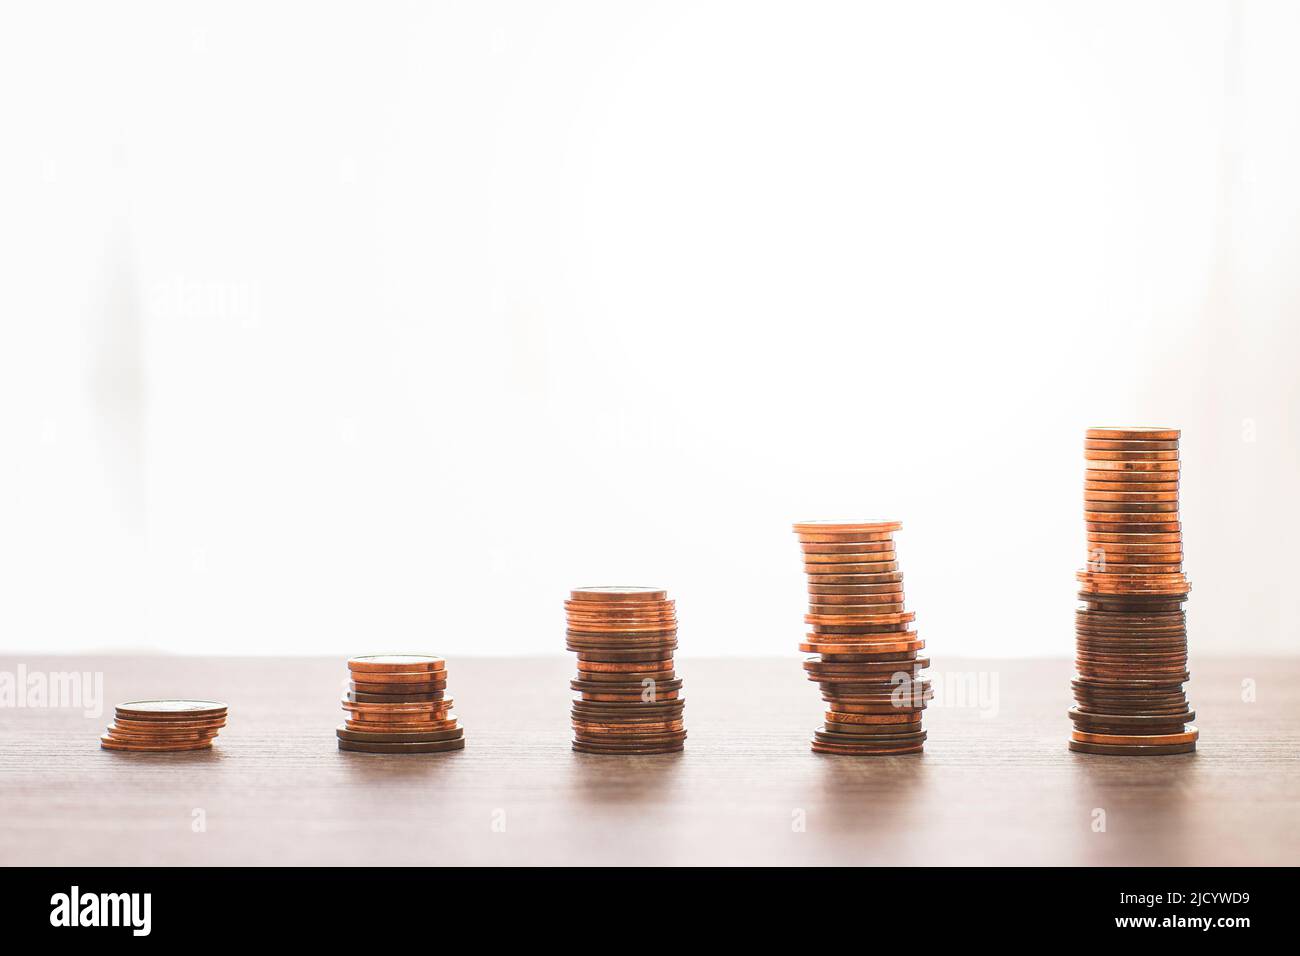 Several stacks of 1, 2 and 5 cent coins symbolizing the bars of an upward trending graph. Stock Photo